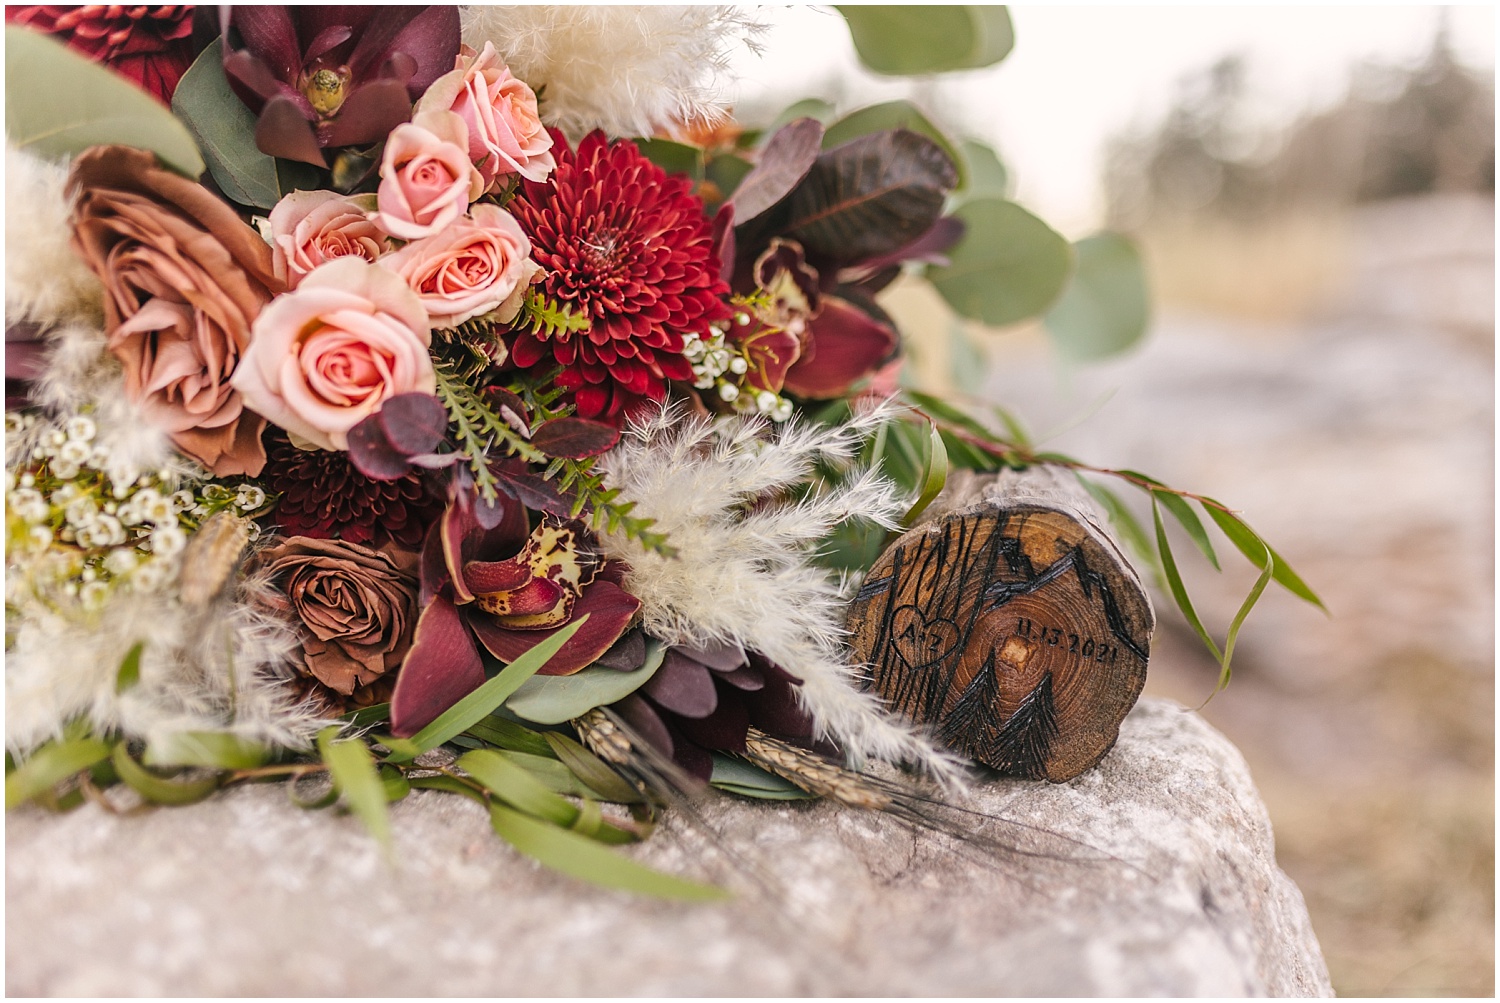 Winter elopement details with custom wooden ring box and bouquet by Floral Elegance Weddings